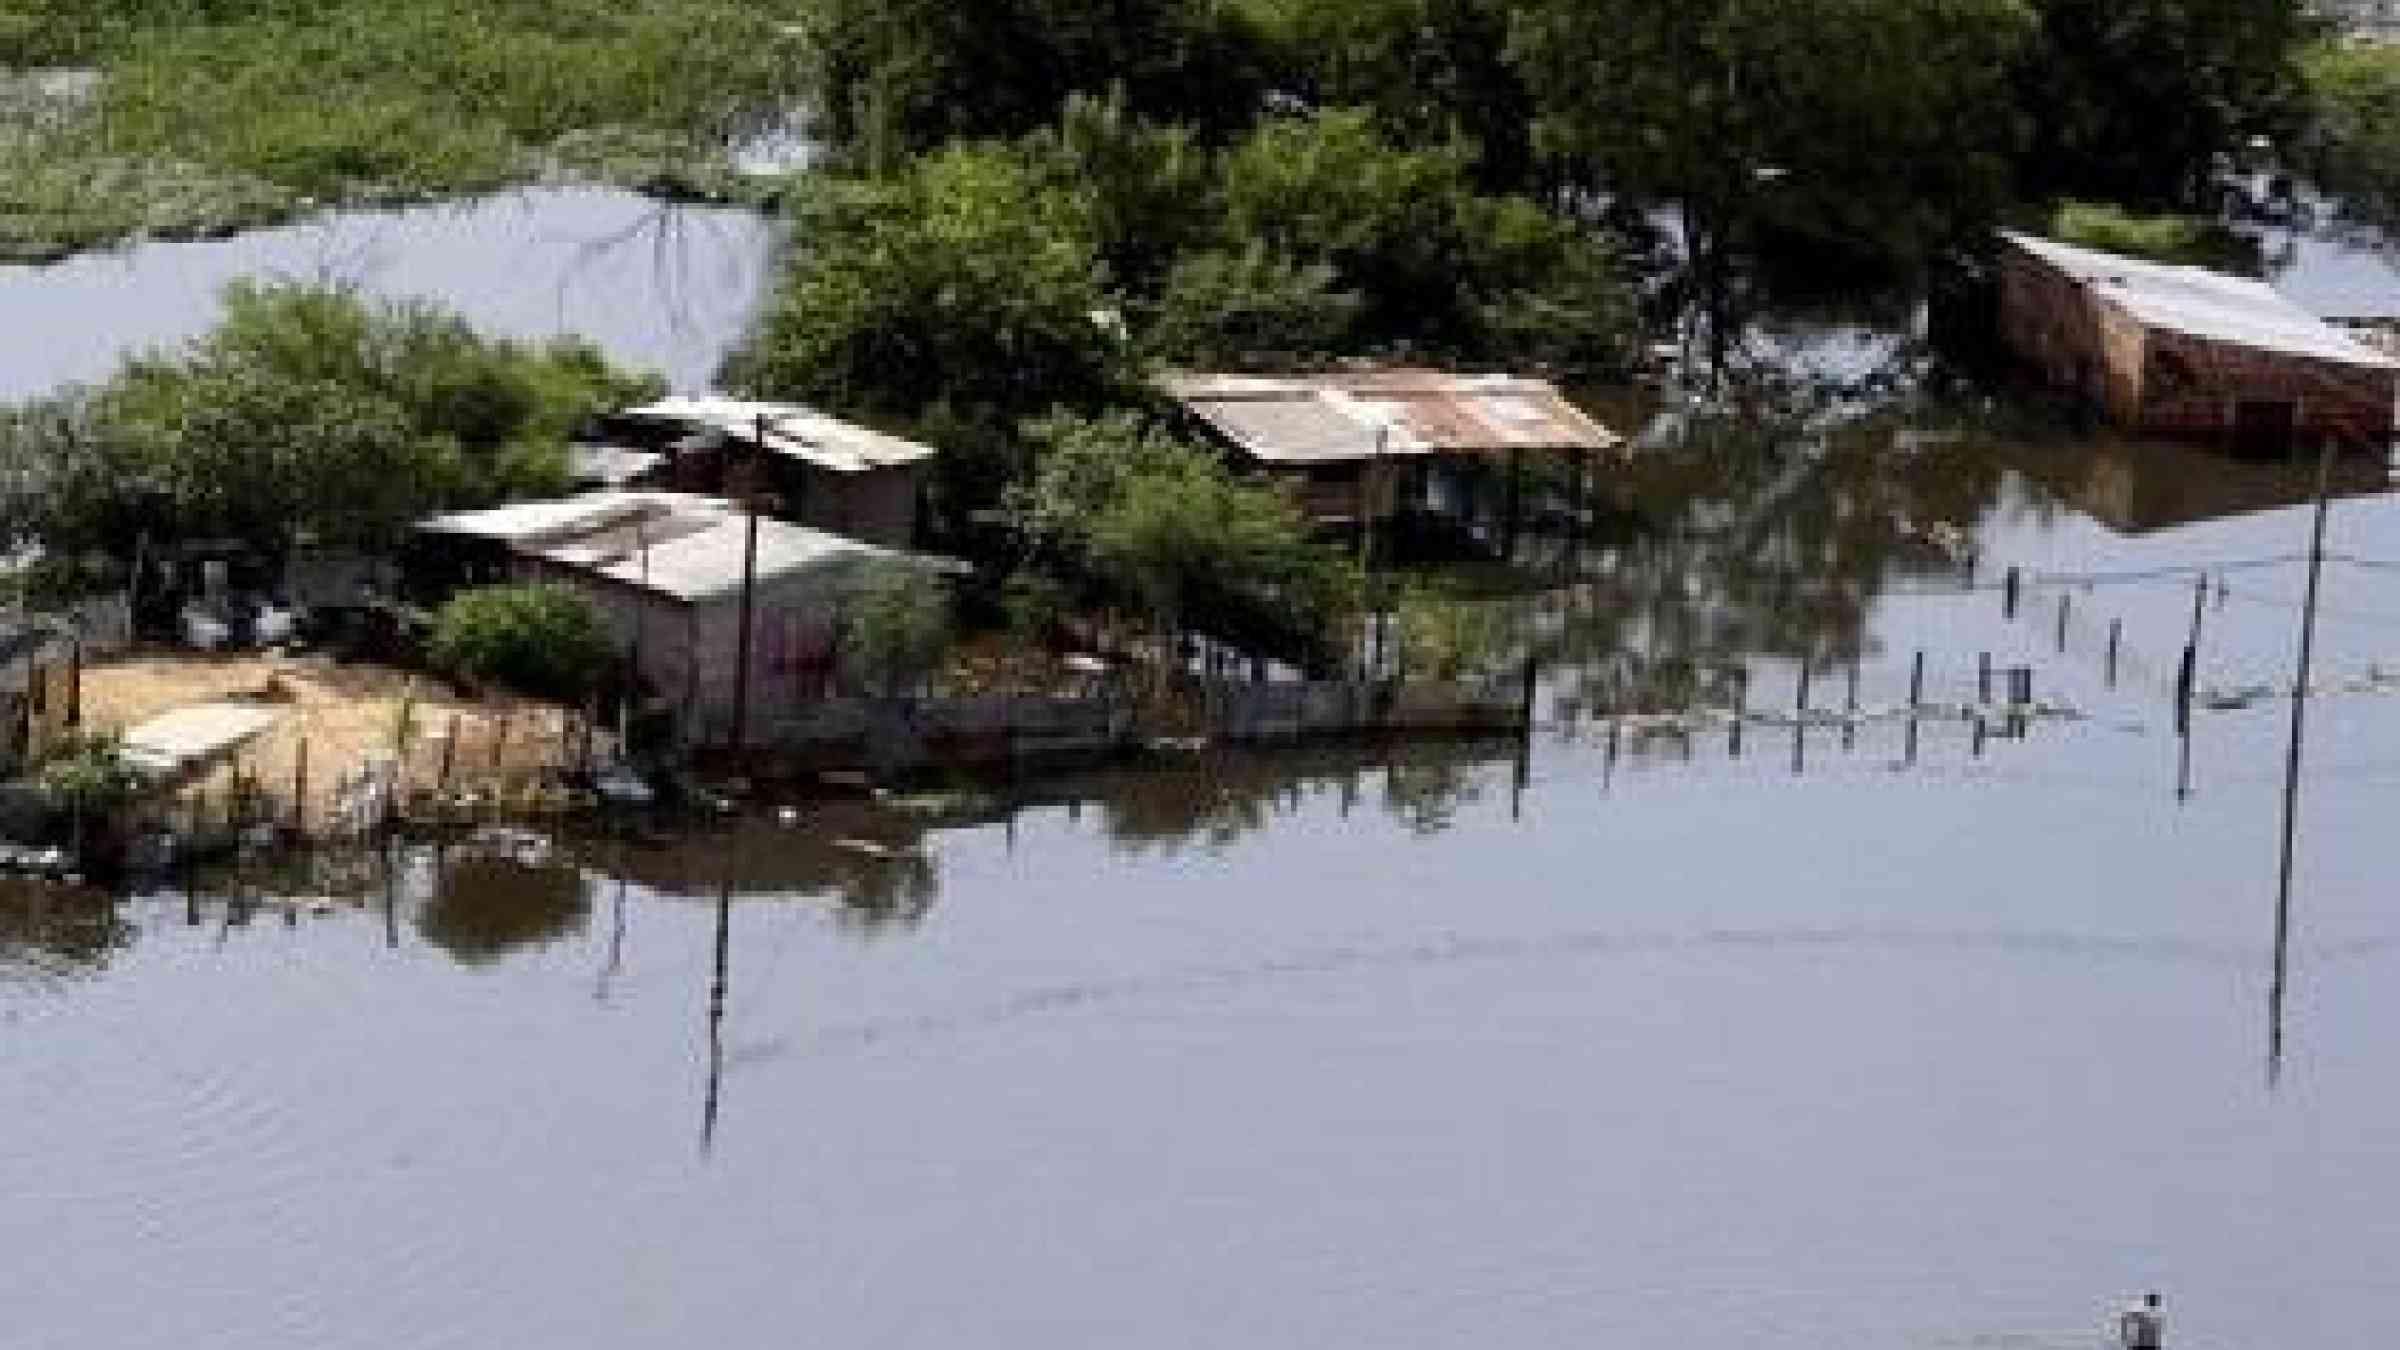 The River Paraguay has swollen to over 7.38 metres, forcing more than 49,000 families to evacuate (Photo: Diario Hoy)